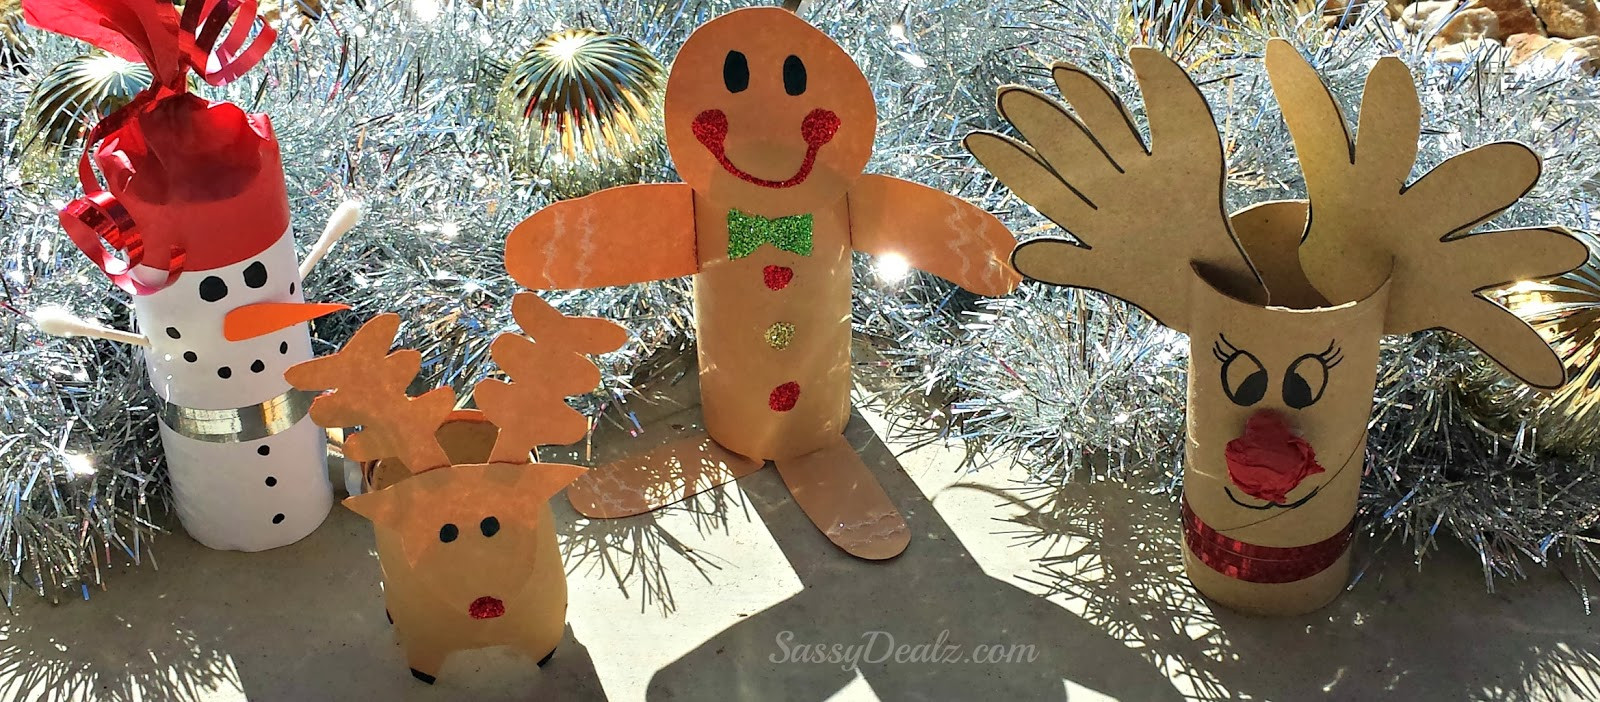 Toilet Paper Roll Craft Christmas
 DIY Christmas Toilet Paper Roll Craft Ideas For Kids